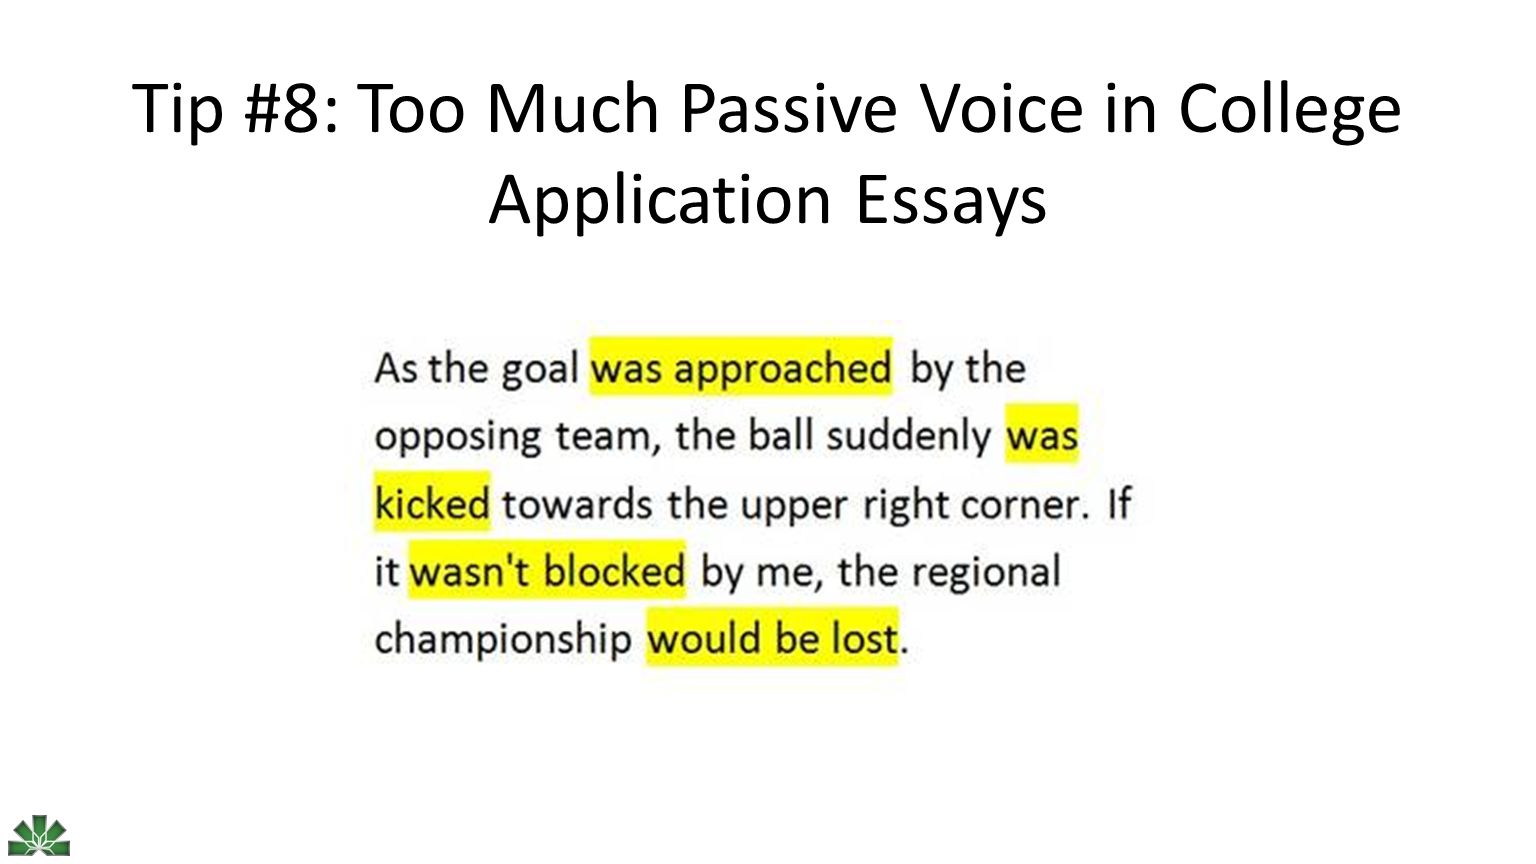 Tip #8: Too Much Passive Voice in College Application Essays